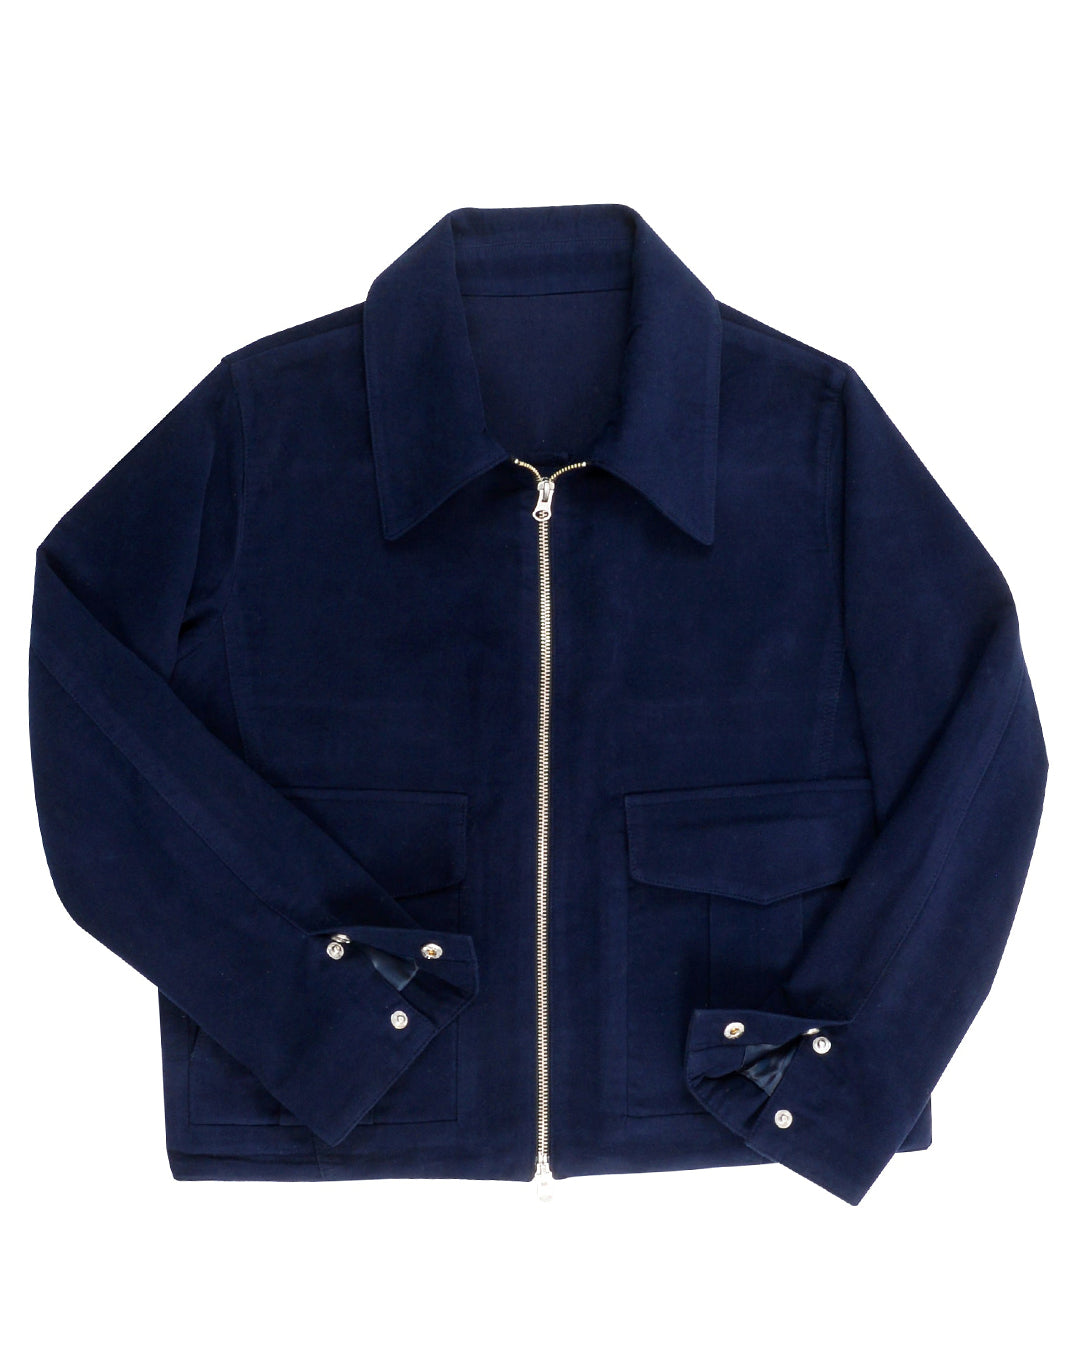 Front of the moleskin shirt jacket for men by Luxire in dark blue